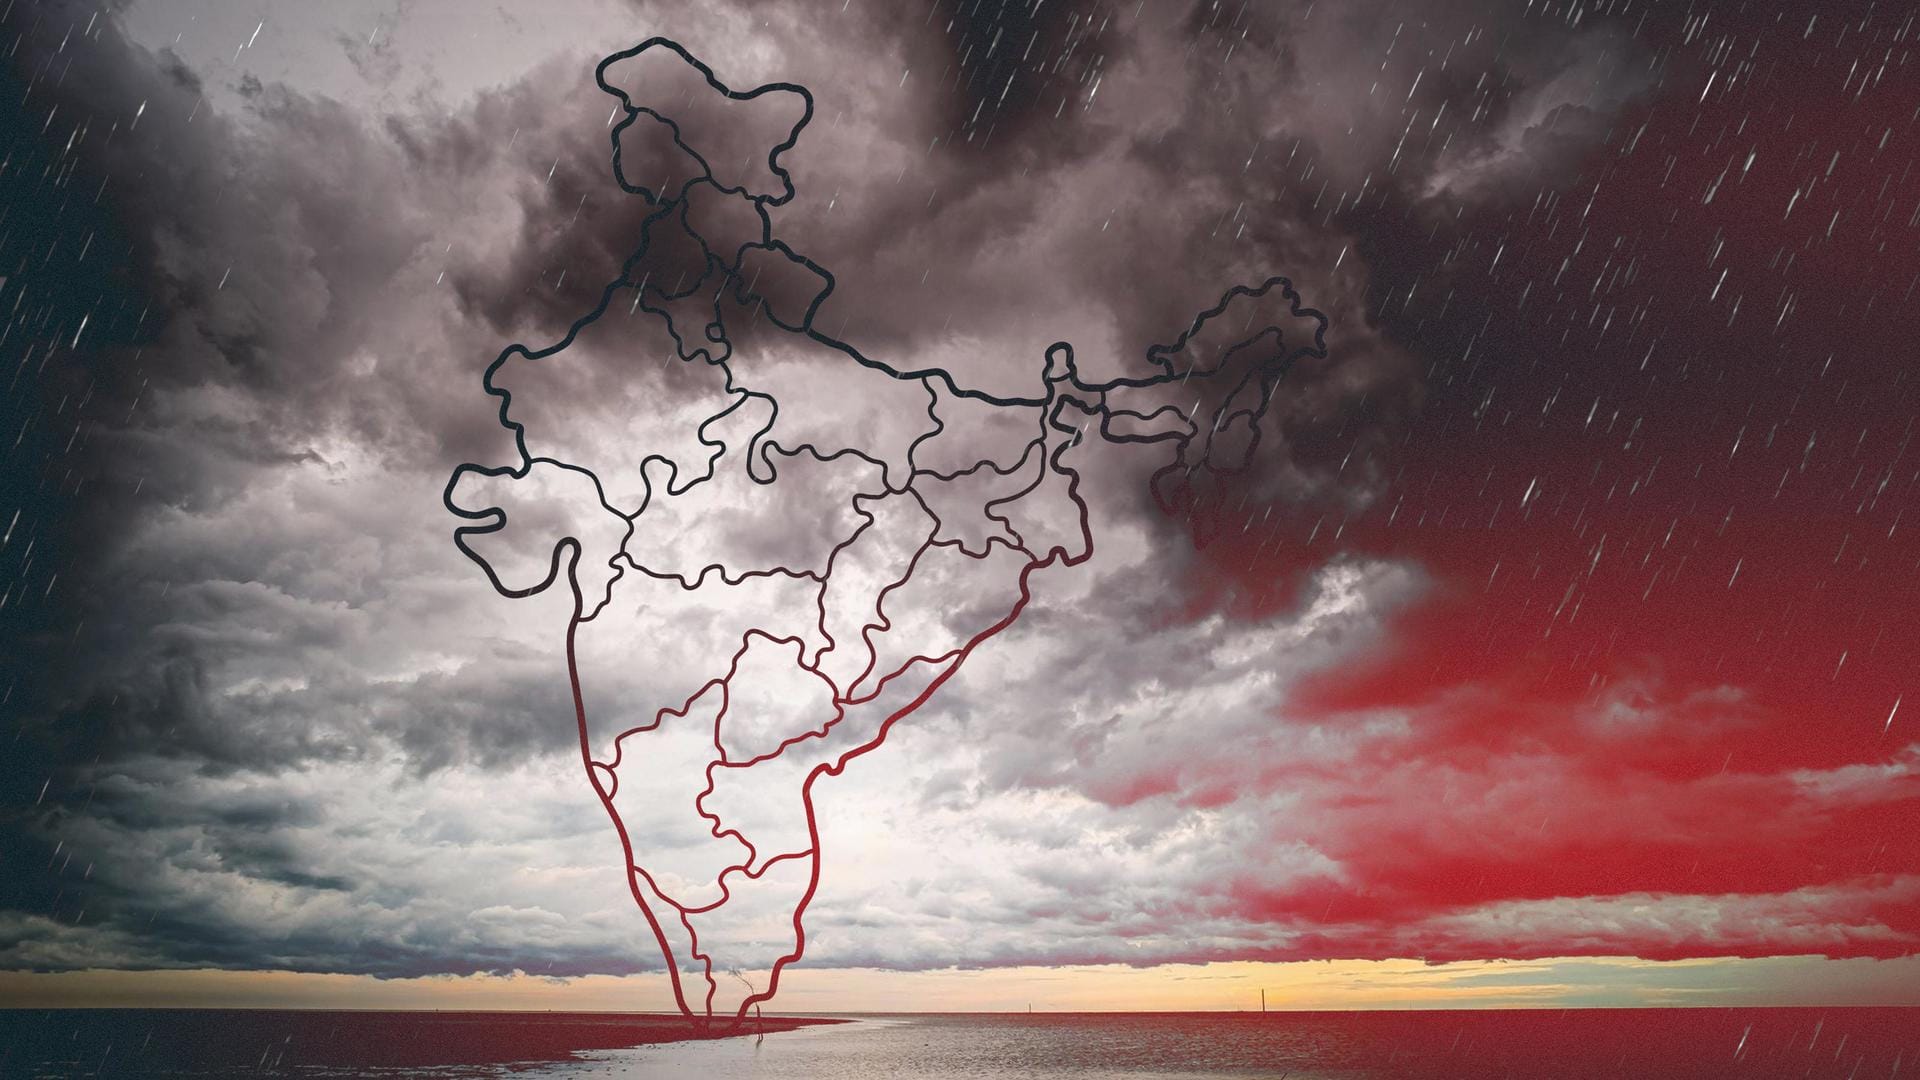 IMD predicts rainfall, thunderstorms in several states; farmers alerted